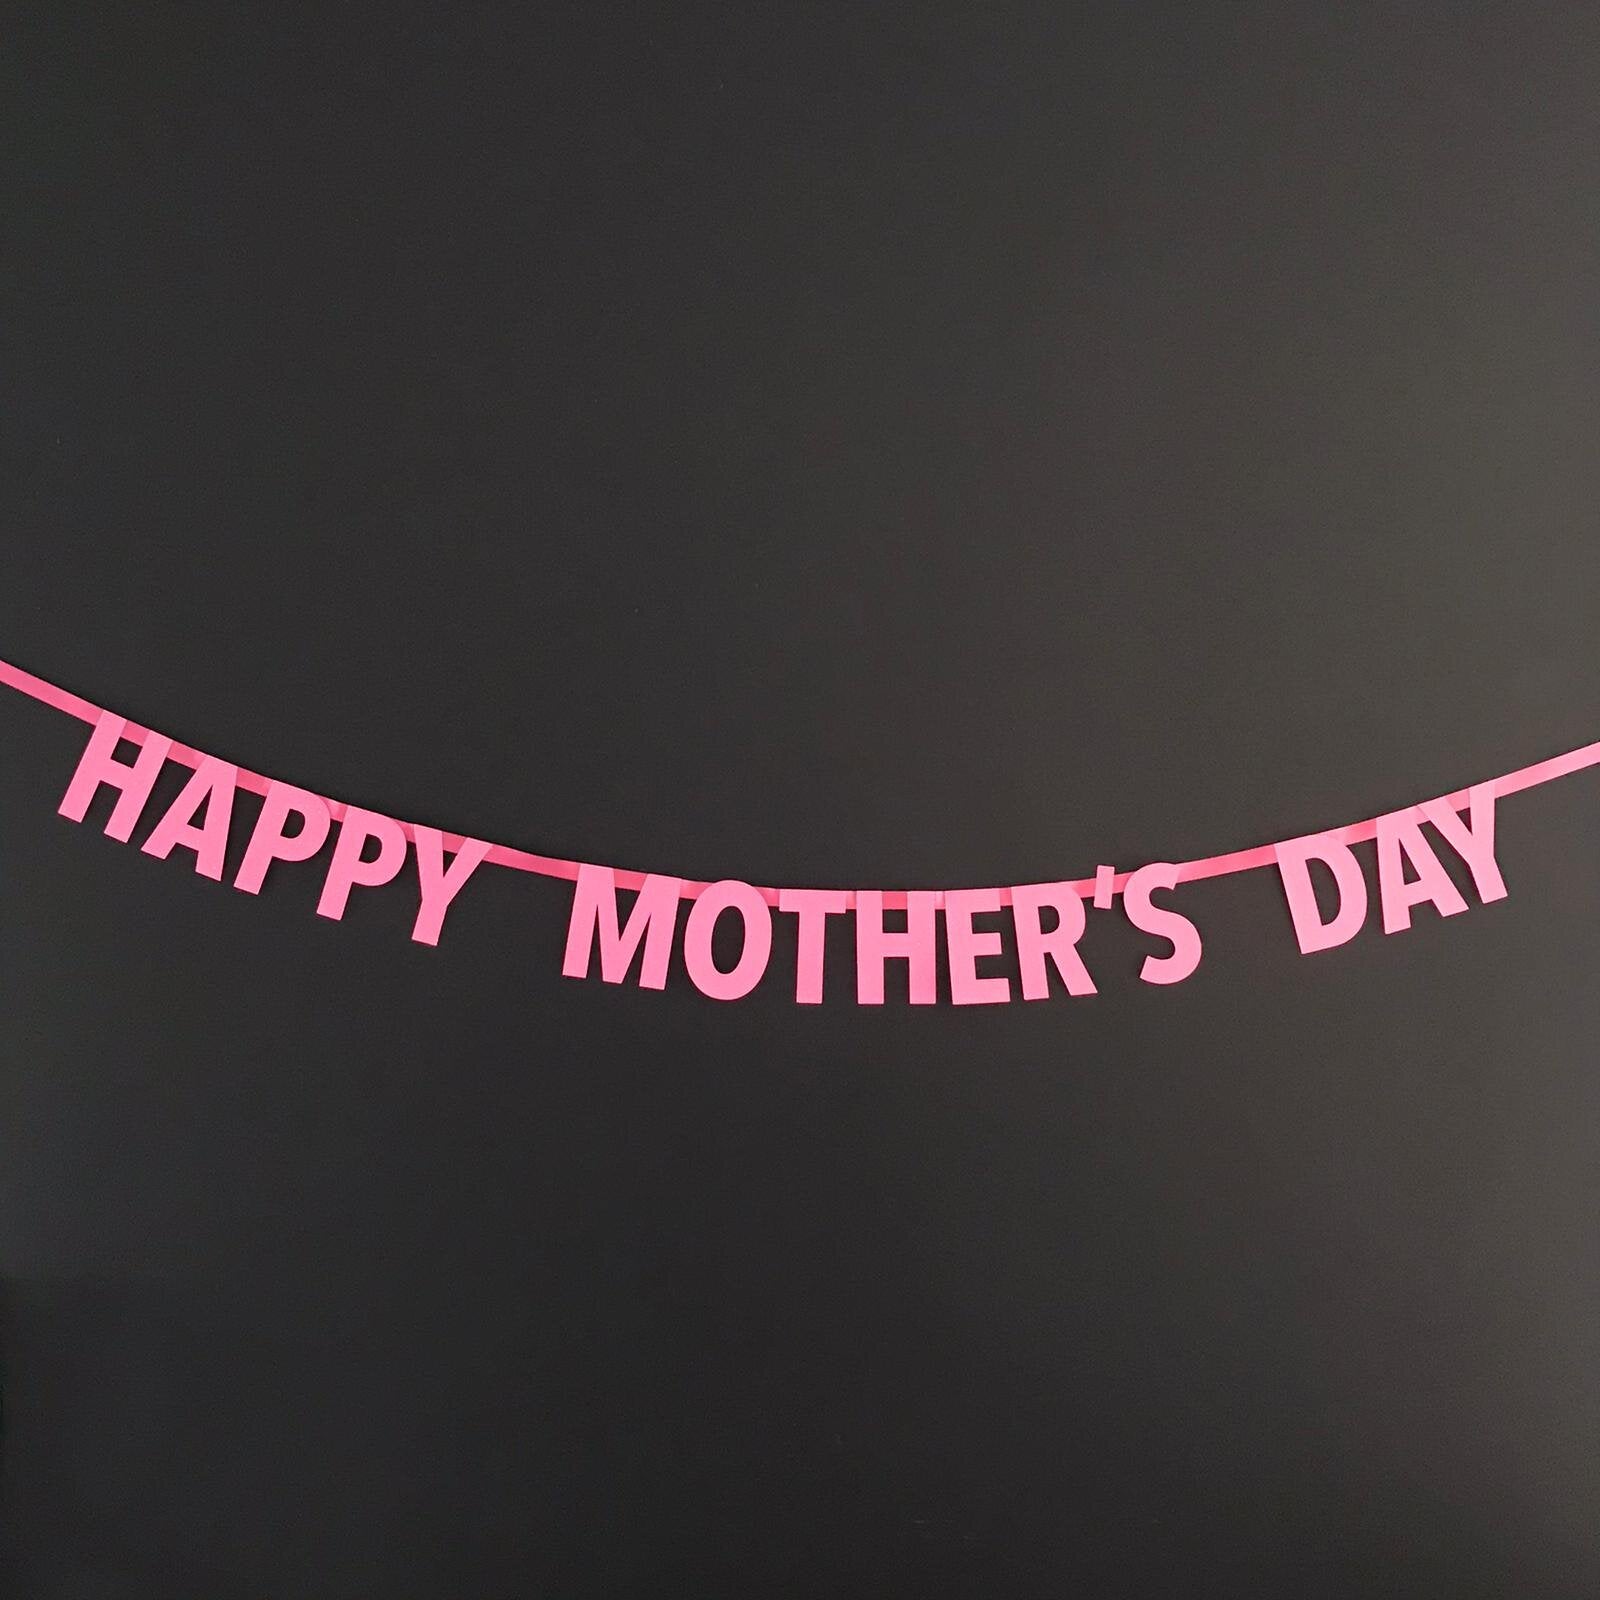 HAPPY MOTHER’S DAY BANNER